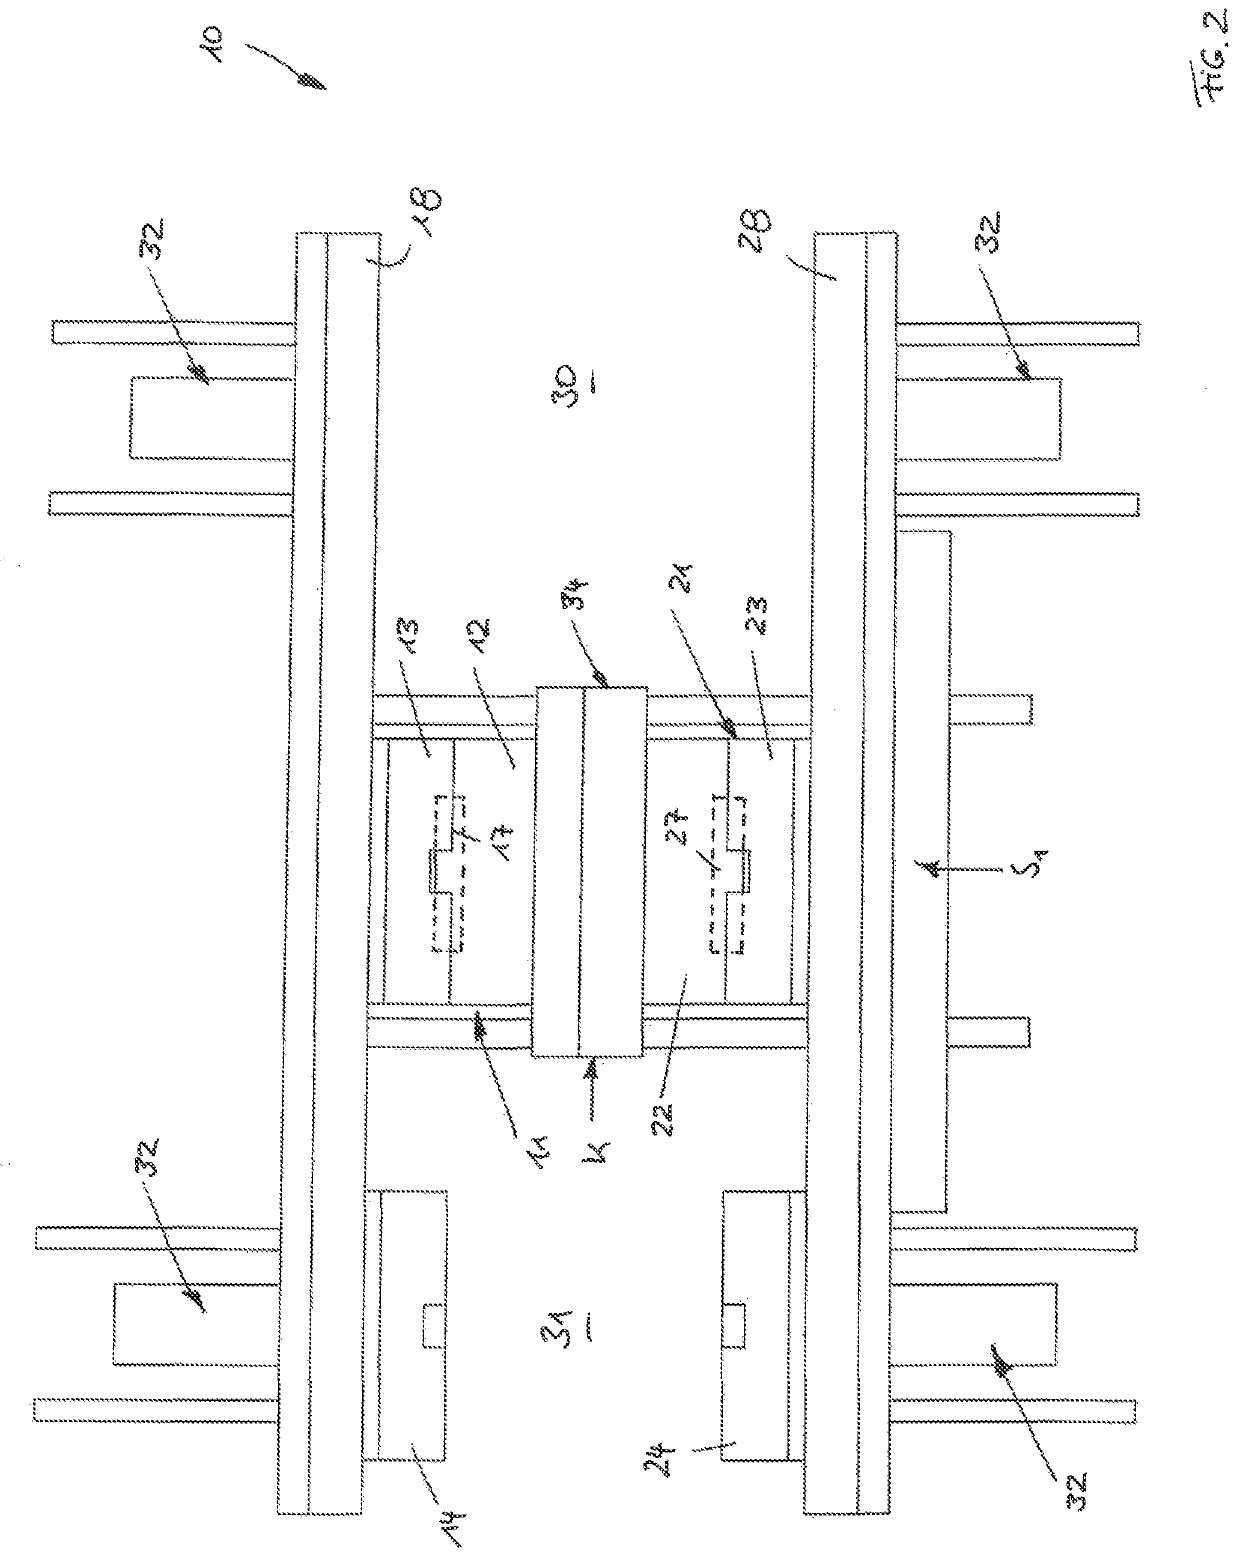 Device and process for manufacturing a component formed of a plurality of moldings made of plastic and welded together